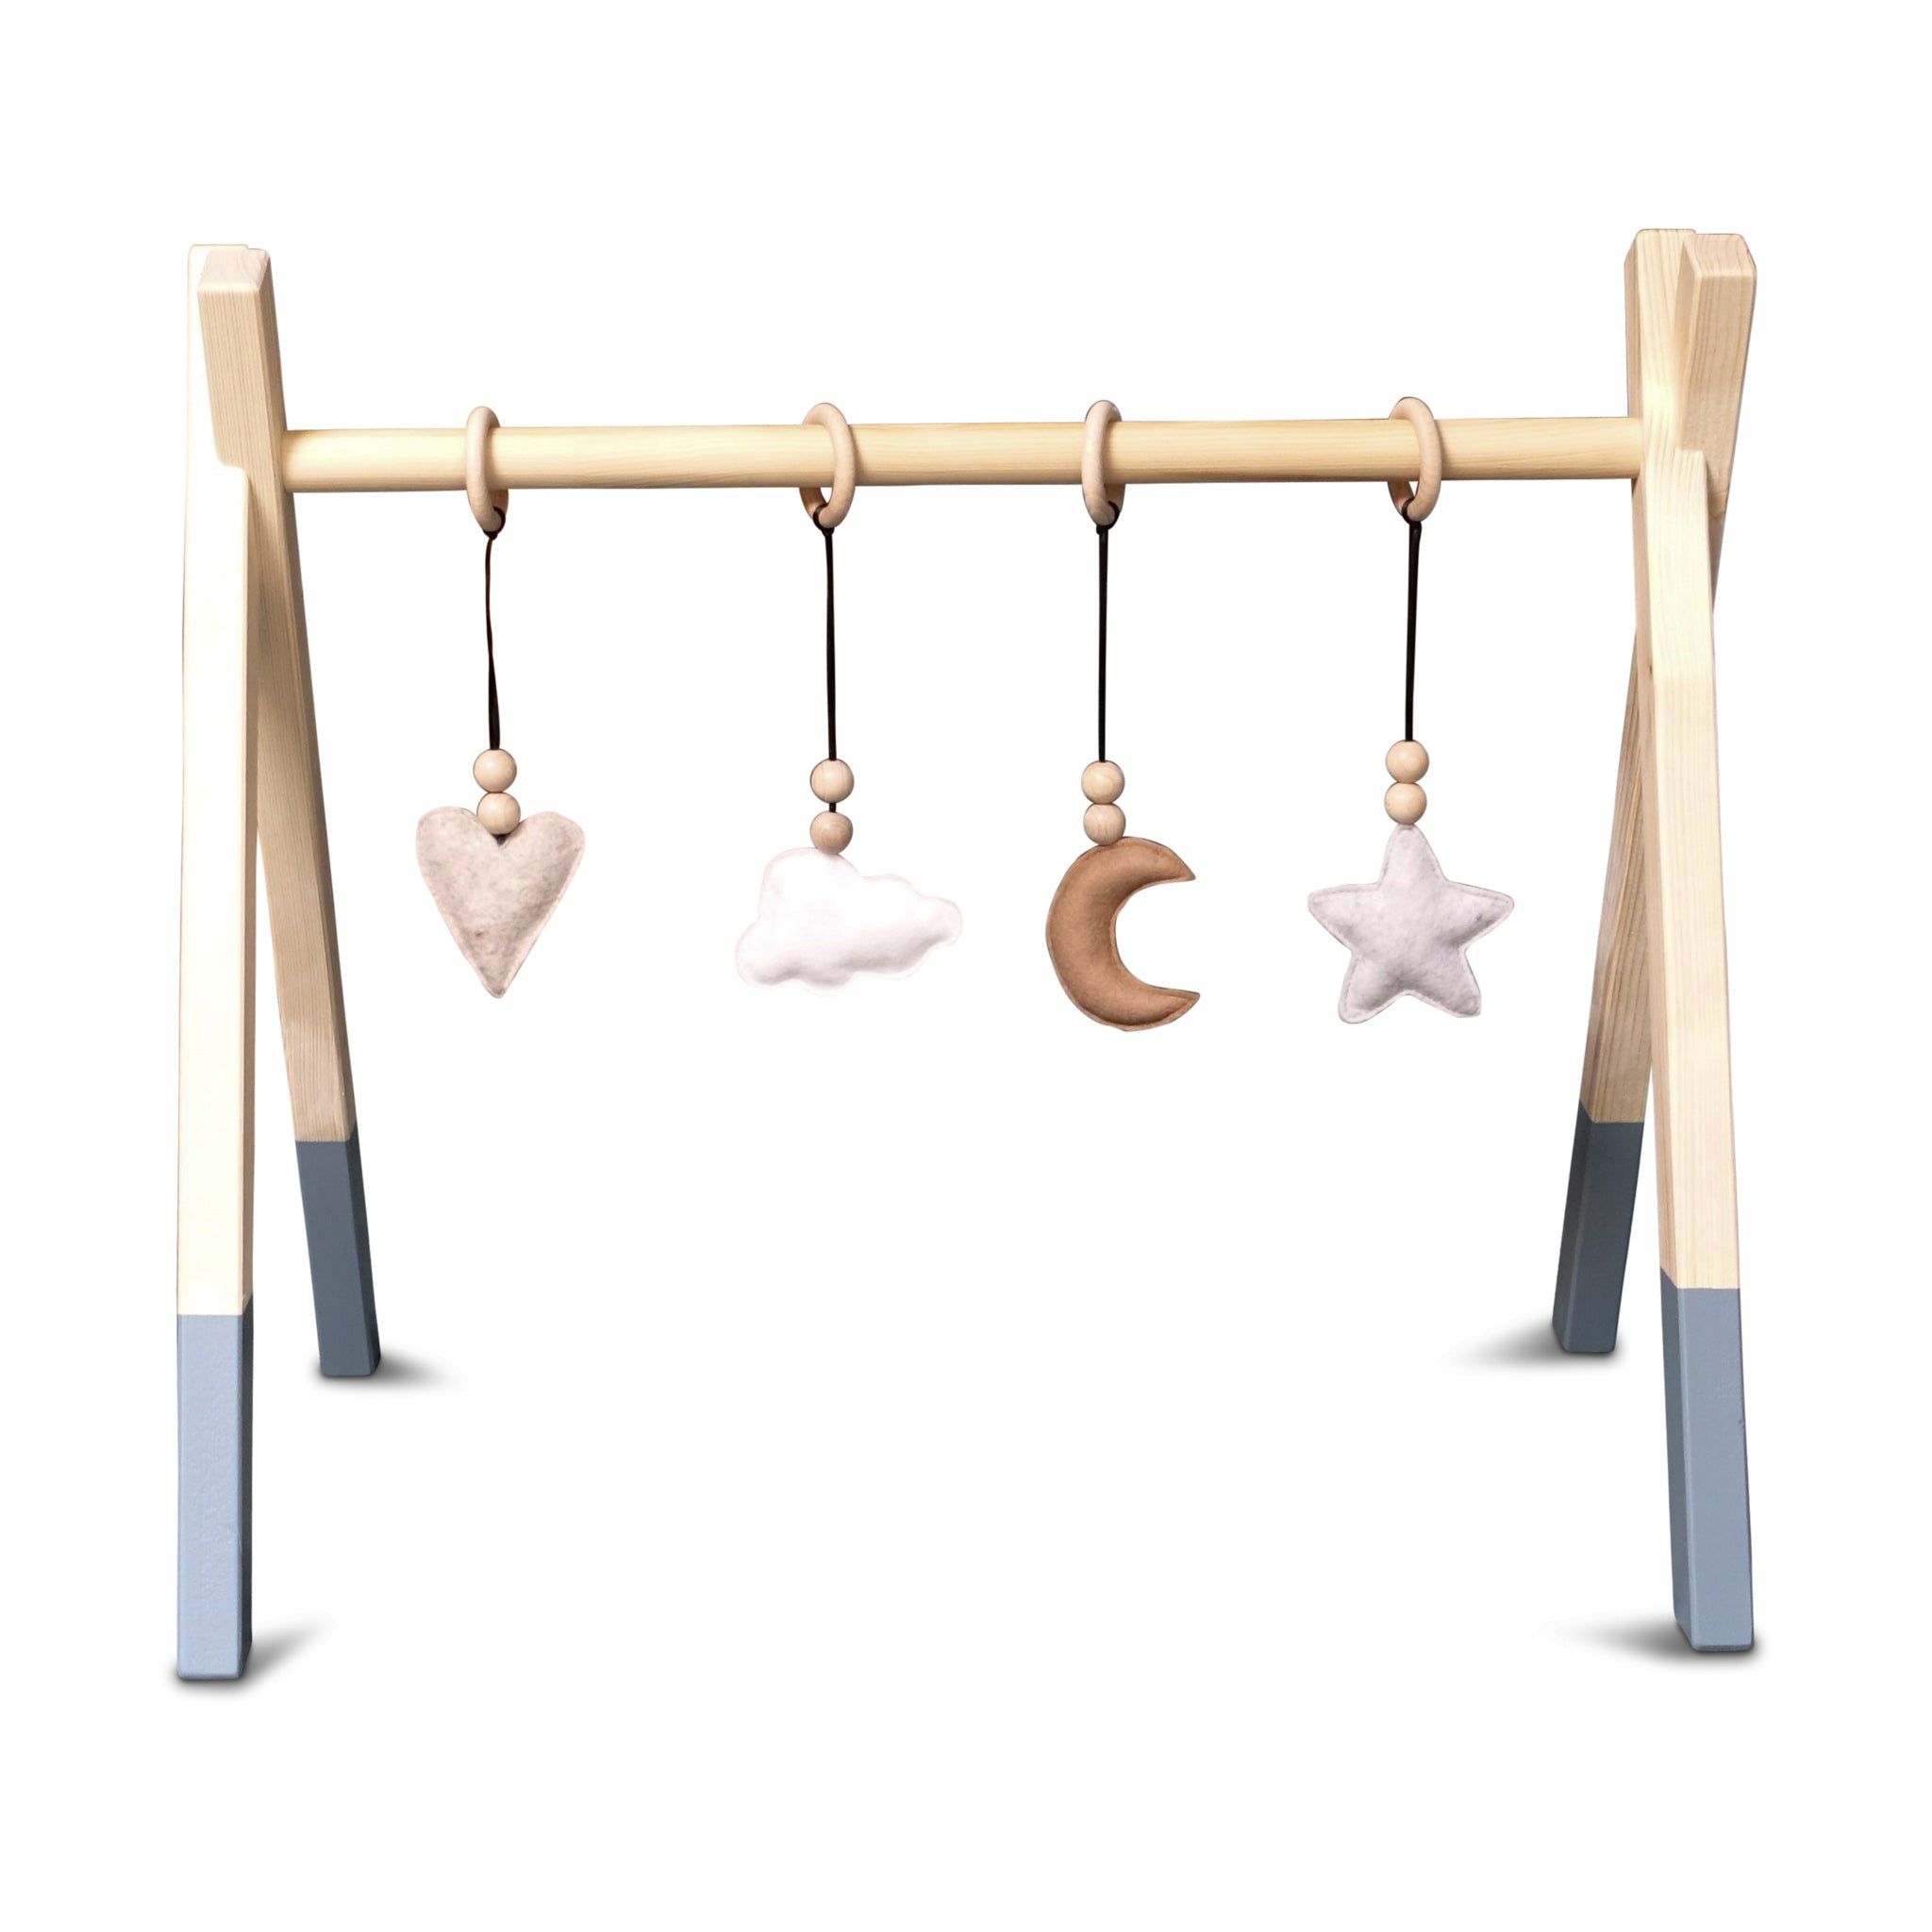 Wooden baby gym | Solid wooden play arch tipi shape with natural hangers - Denim drift